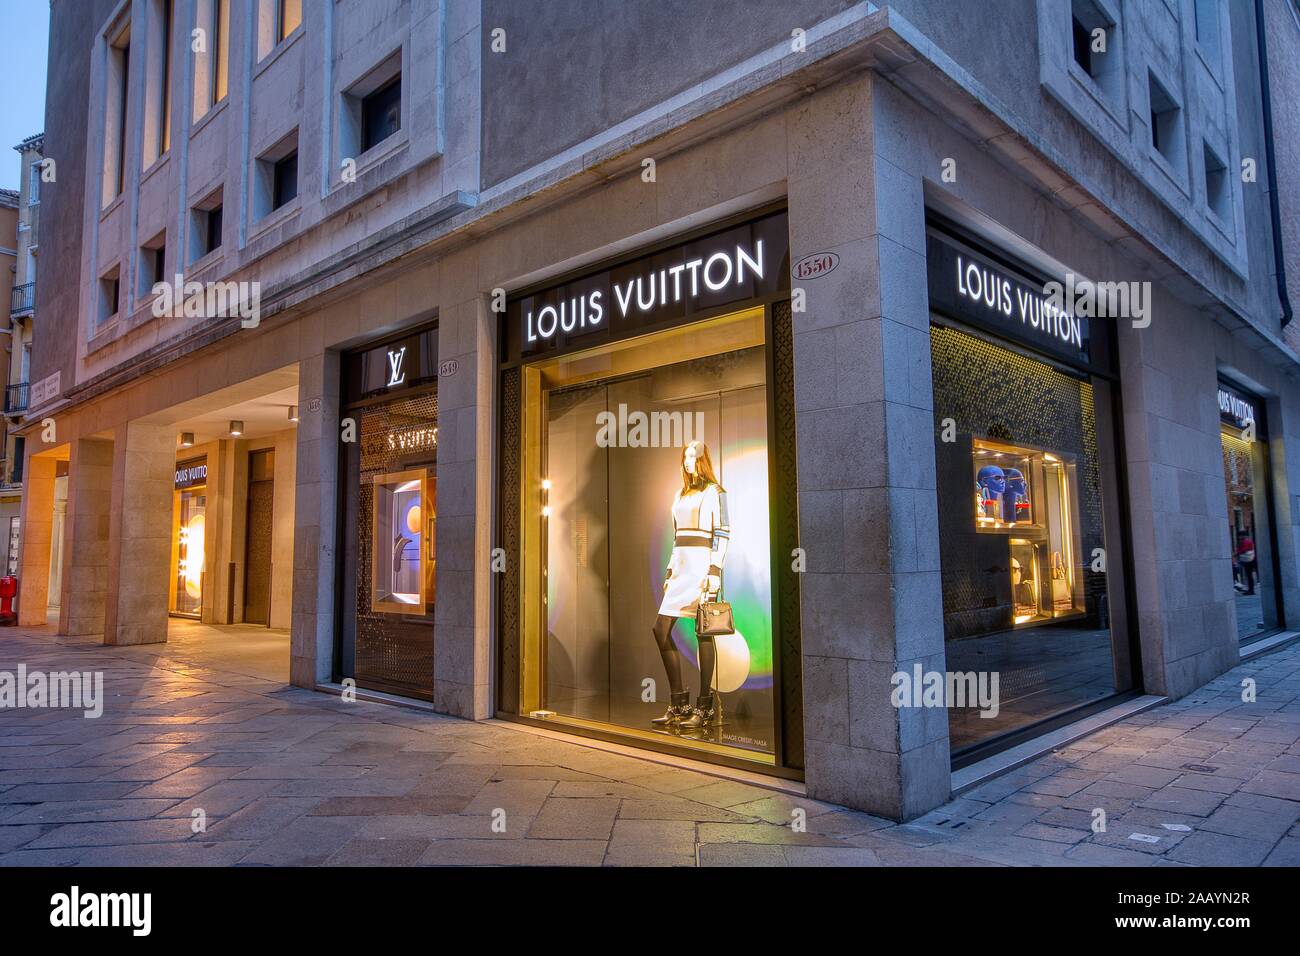 Lvmh luxury brand hi-res stock photography and images - Alamy